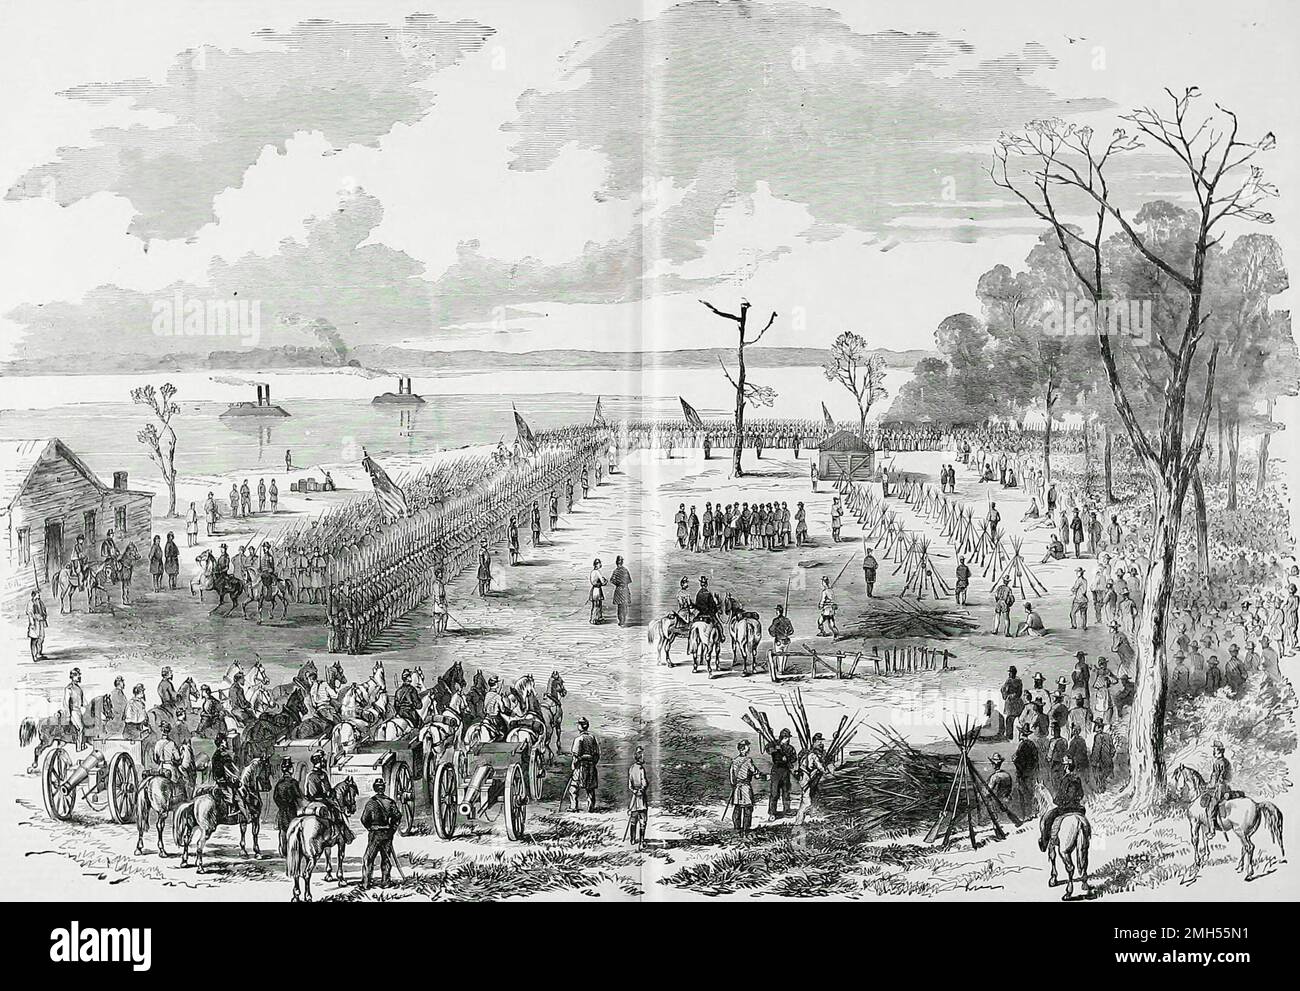 The Battle of Island Number 10 was a battle in the American Civil War fought on 28th February-April 8th  1862 in Kentucky. It was an Unionist amphibious assault on Island Number 10 which held a commanding position in the Mississippi River. The assault was under the command of John Pope, and it was a Unionist victory as the island was captured. The image depicts surrender of the Confederate Forces, five thousand strong, under Generals McCall and Gantt, to General Paine, at Tiptonville, Tenn., April 8th 1862. Stock Photo